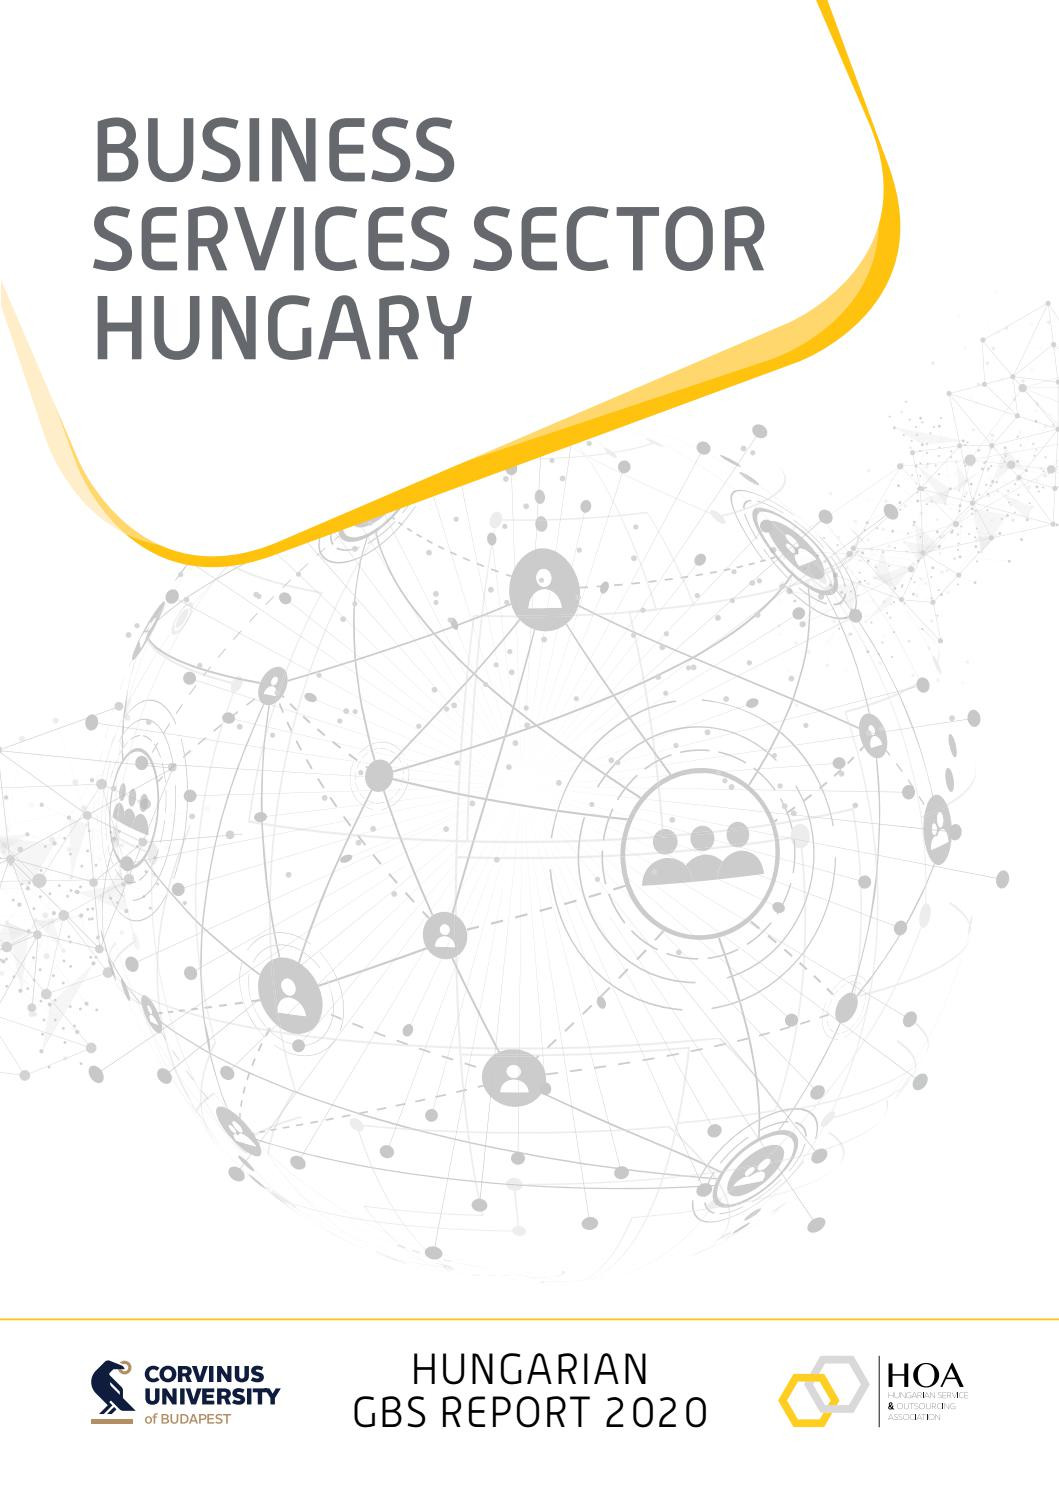 Gbs Strategy and Planning Sample Resume Business Services Sector Hungary – Hungarian Gbs Report 2020 by …